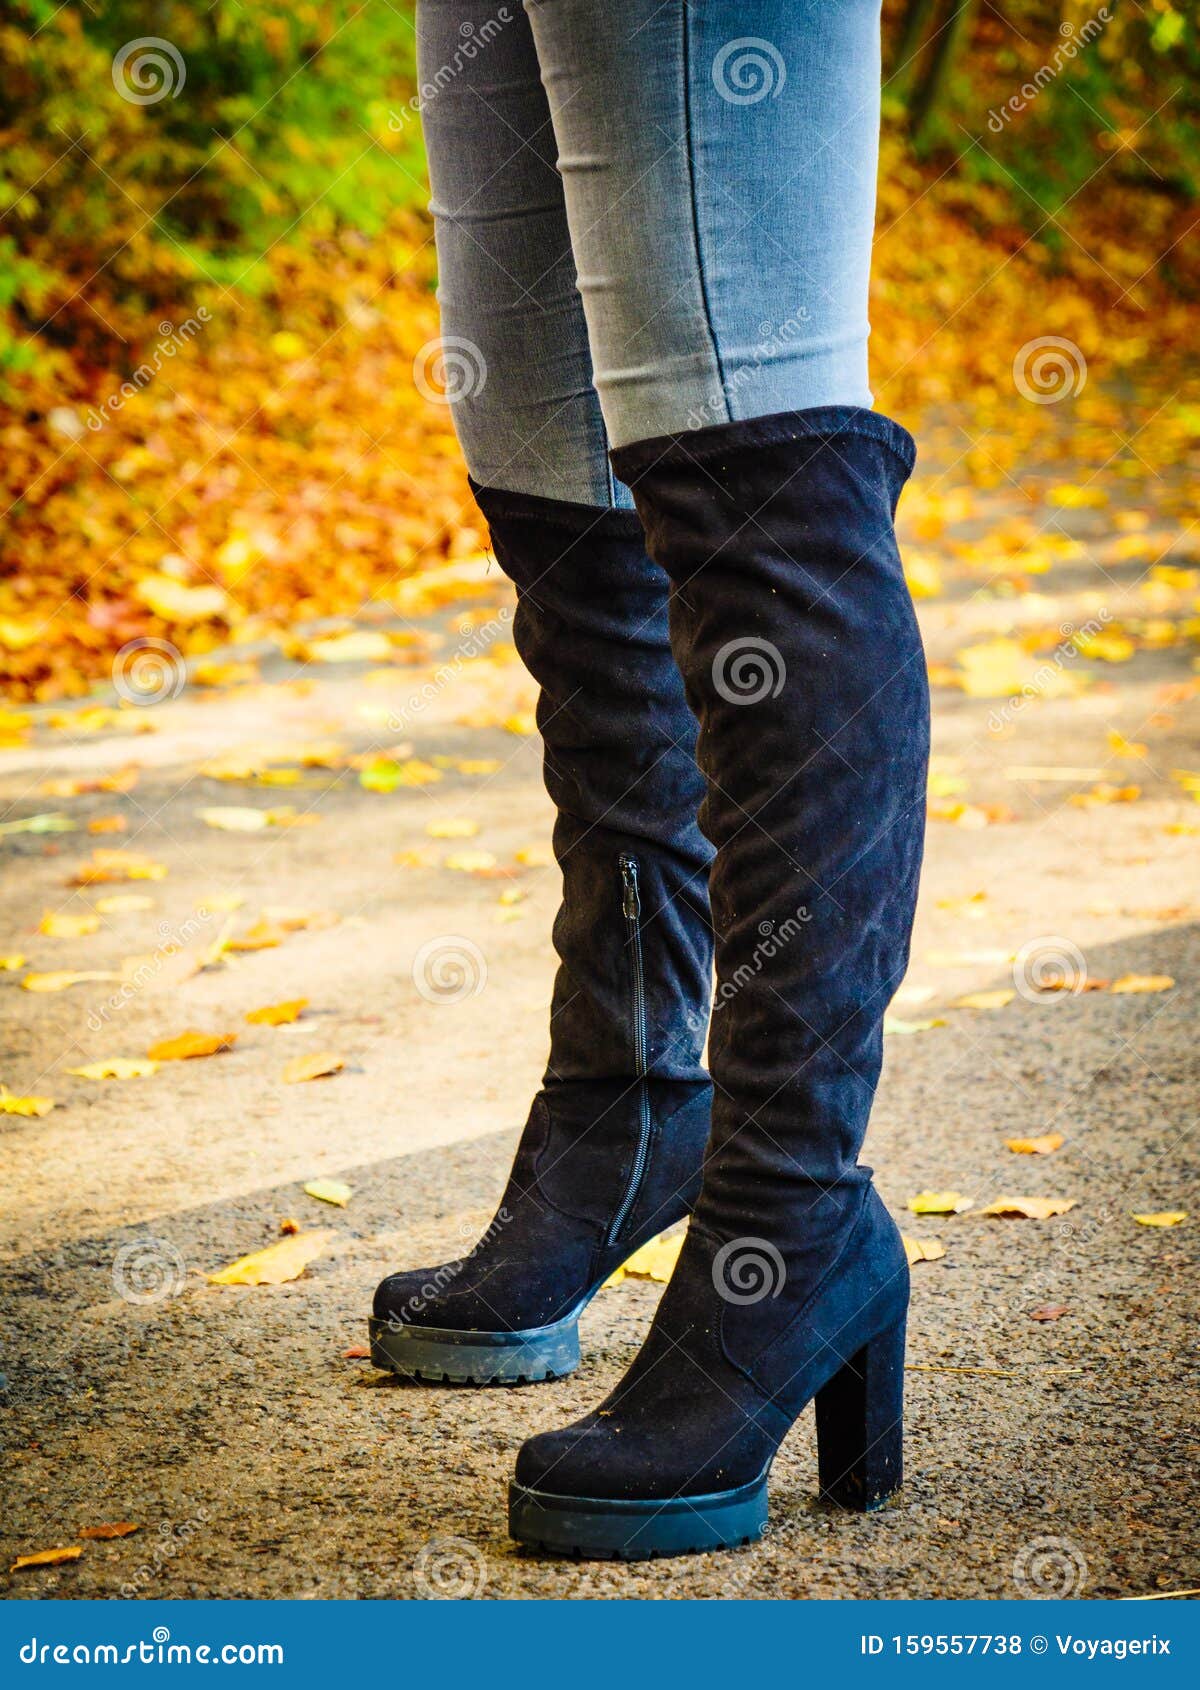 Woman Wearing Black Knee High Boots Stock Photo - Image of boots, knee ...